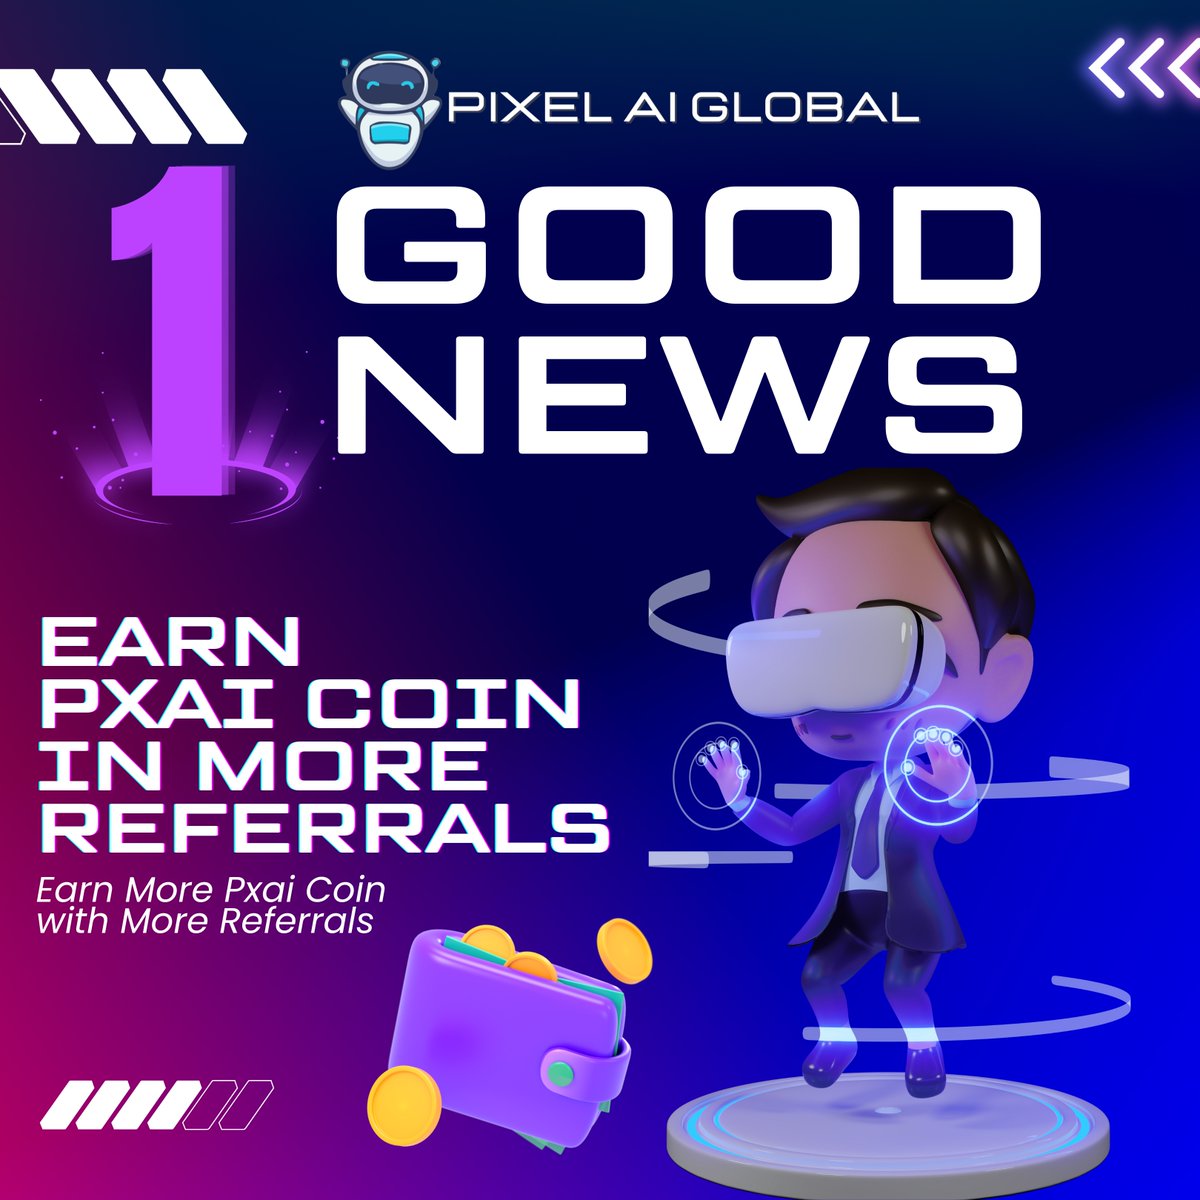 🚀 Exciting News! 🚀
Earn more PXAI coins now with the new opportunity from PixelAi Global!
Stay tuned for further details and start boosting your PXAI coin balance today! 💰✨ #PXAI #EarnMore #OpportunityKnocks